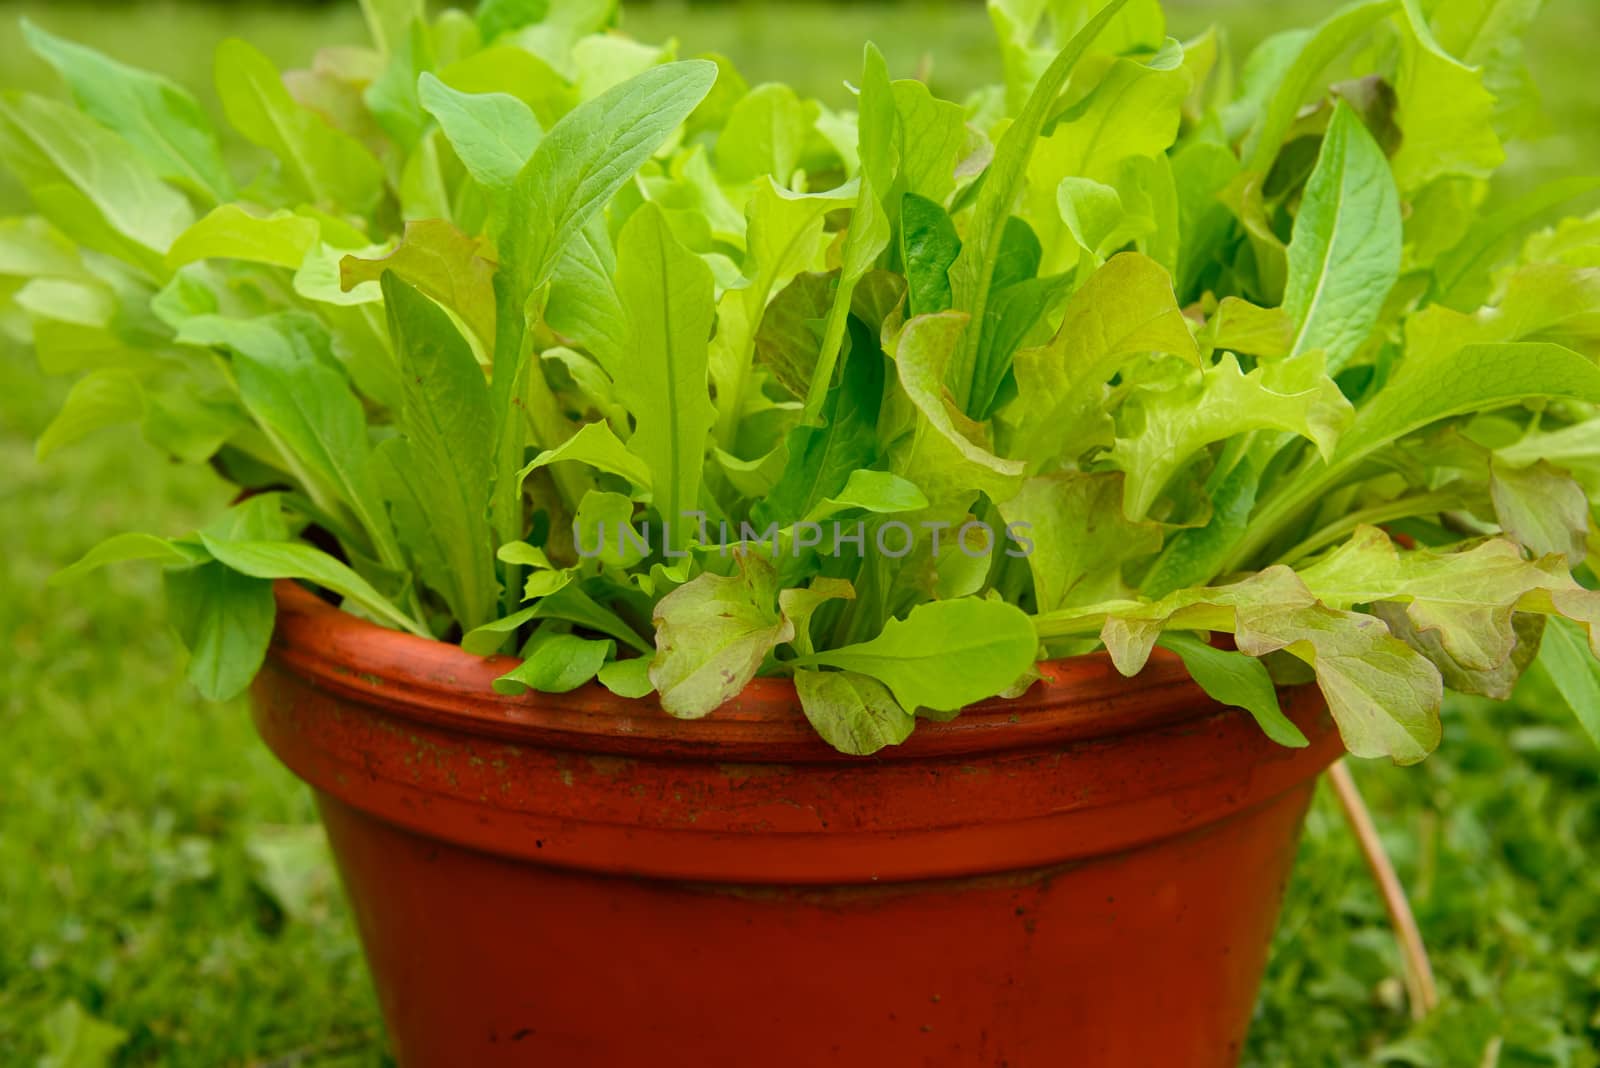 Growing salad in a pot by GryT